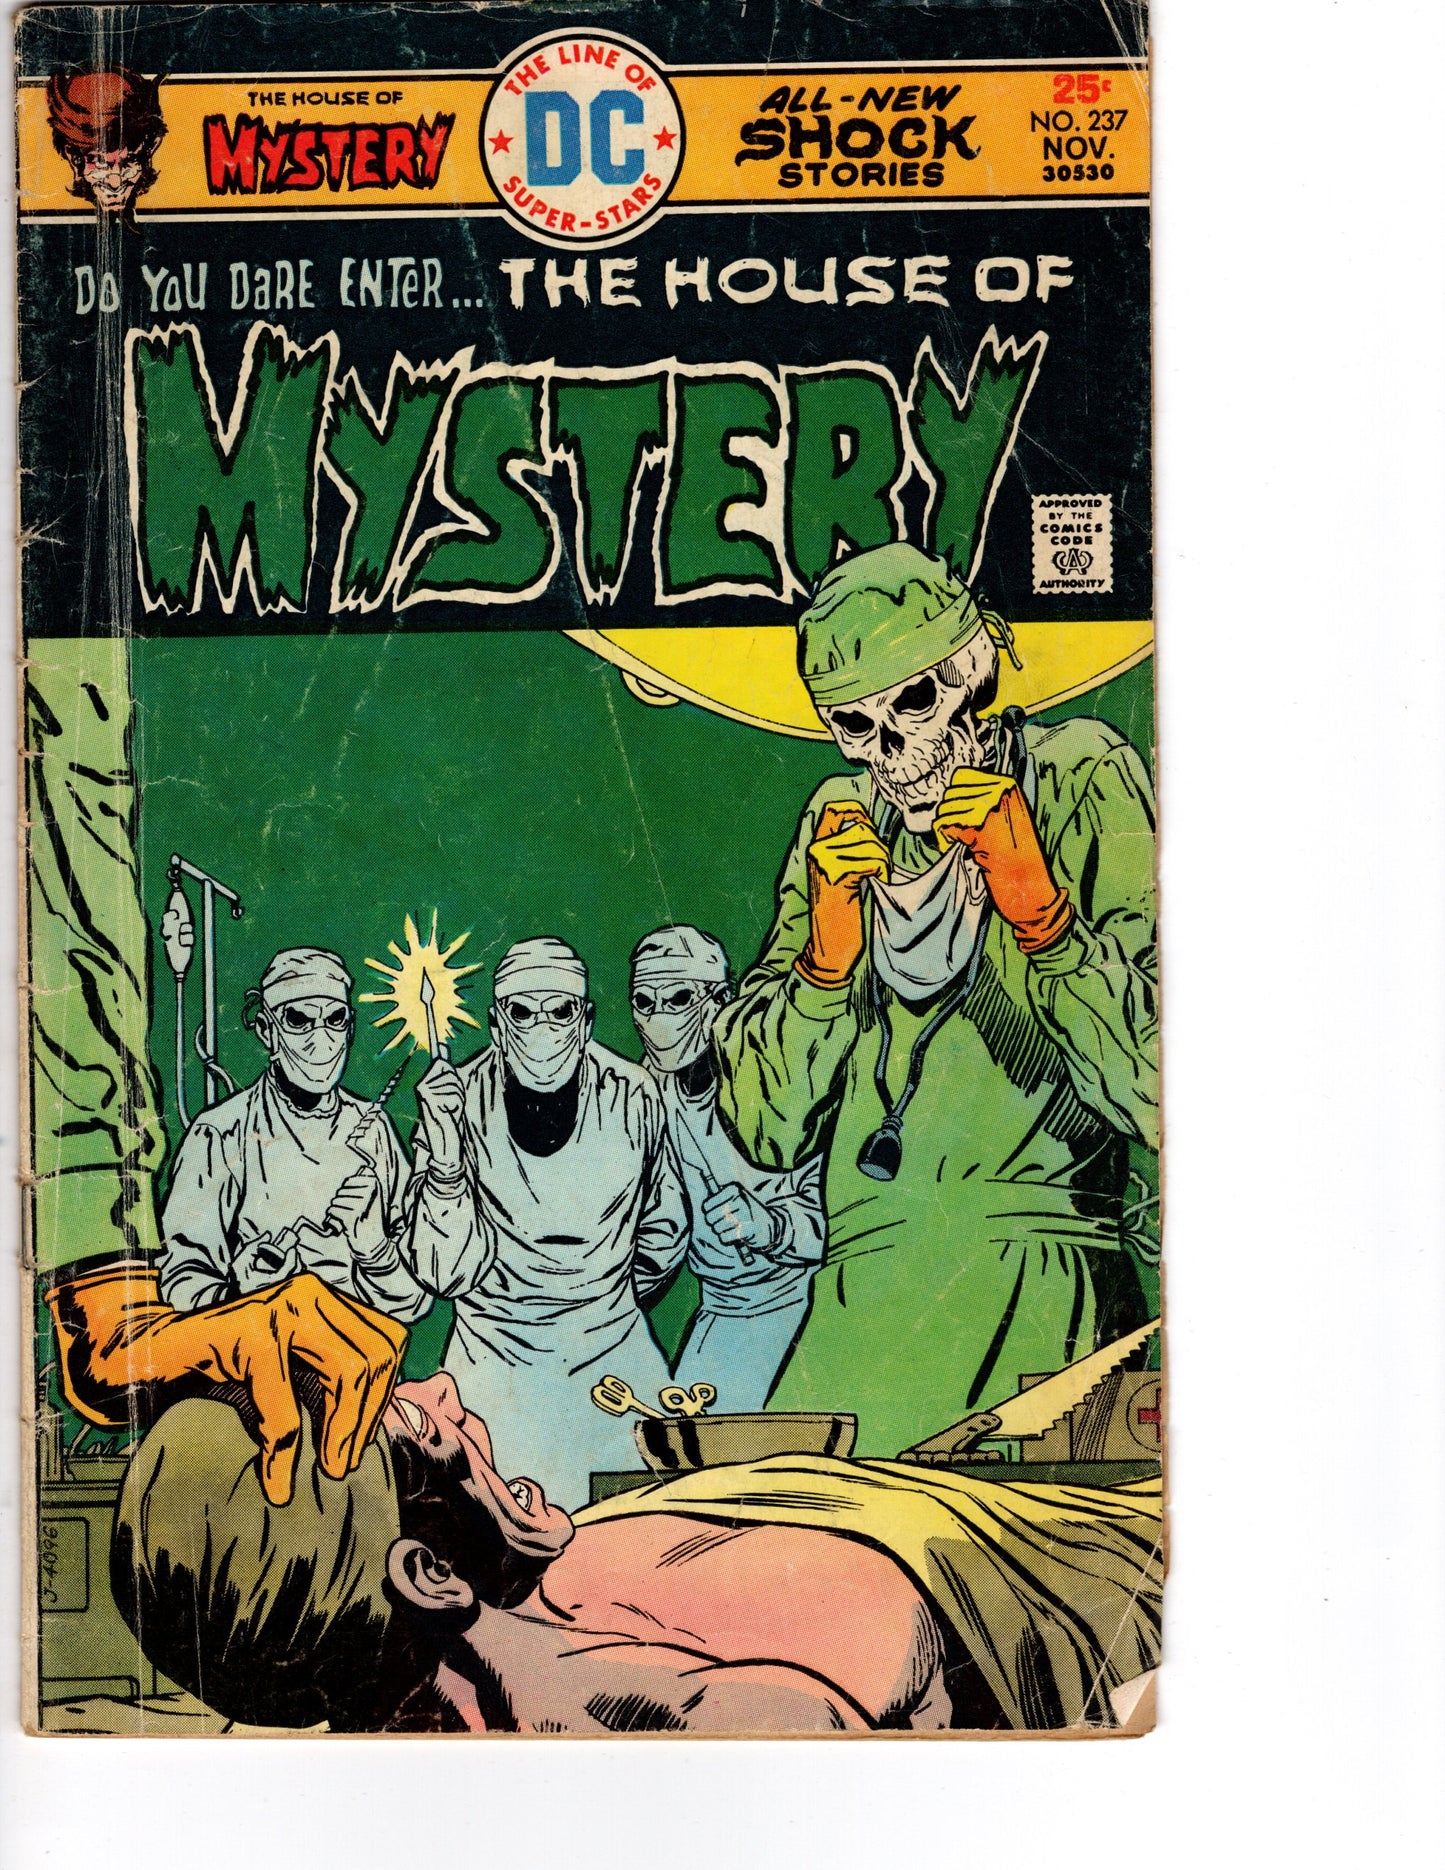 The House of Mystery #237